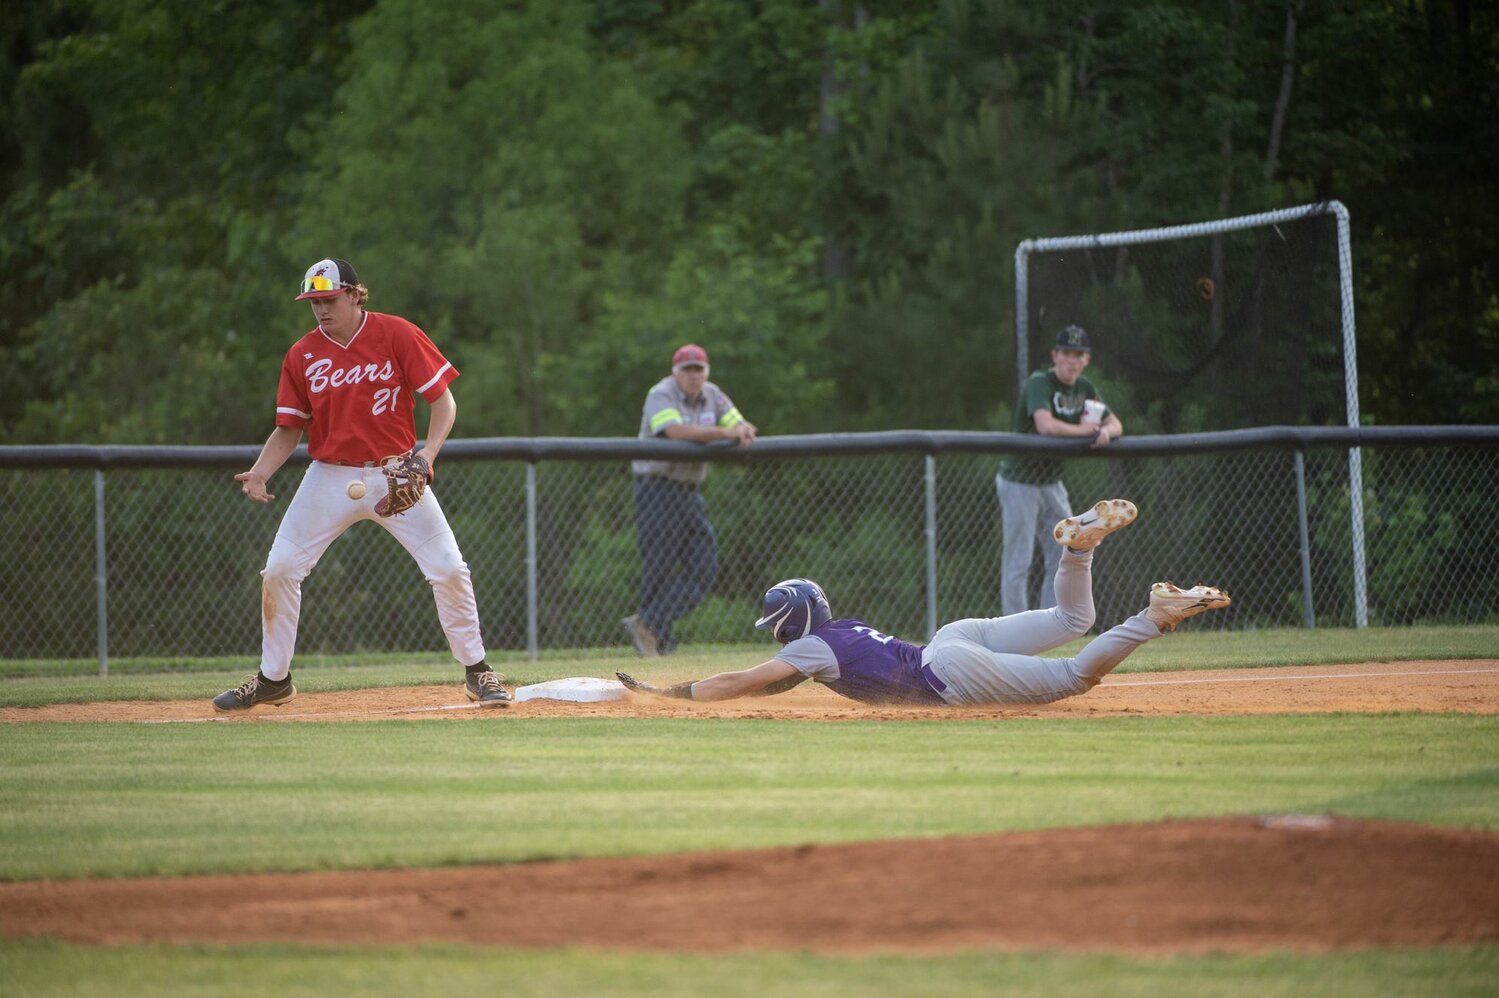 Chatham Charter junior Aidan Allred steals third base during Friday's 7-4 win over Chatham Central in the second round of the 1A state playoffs